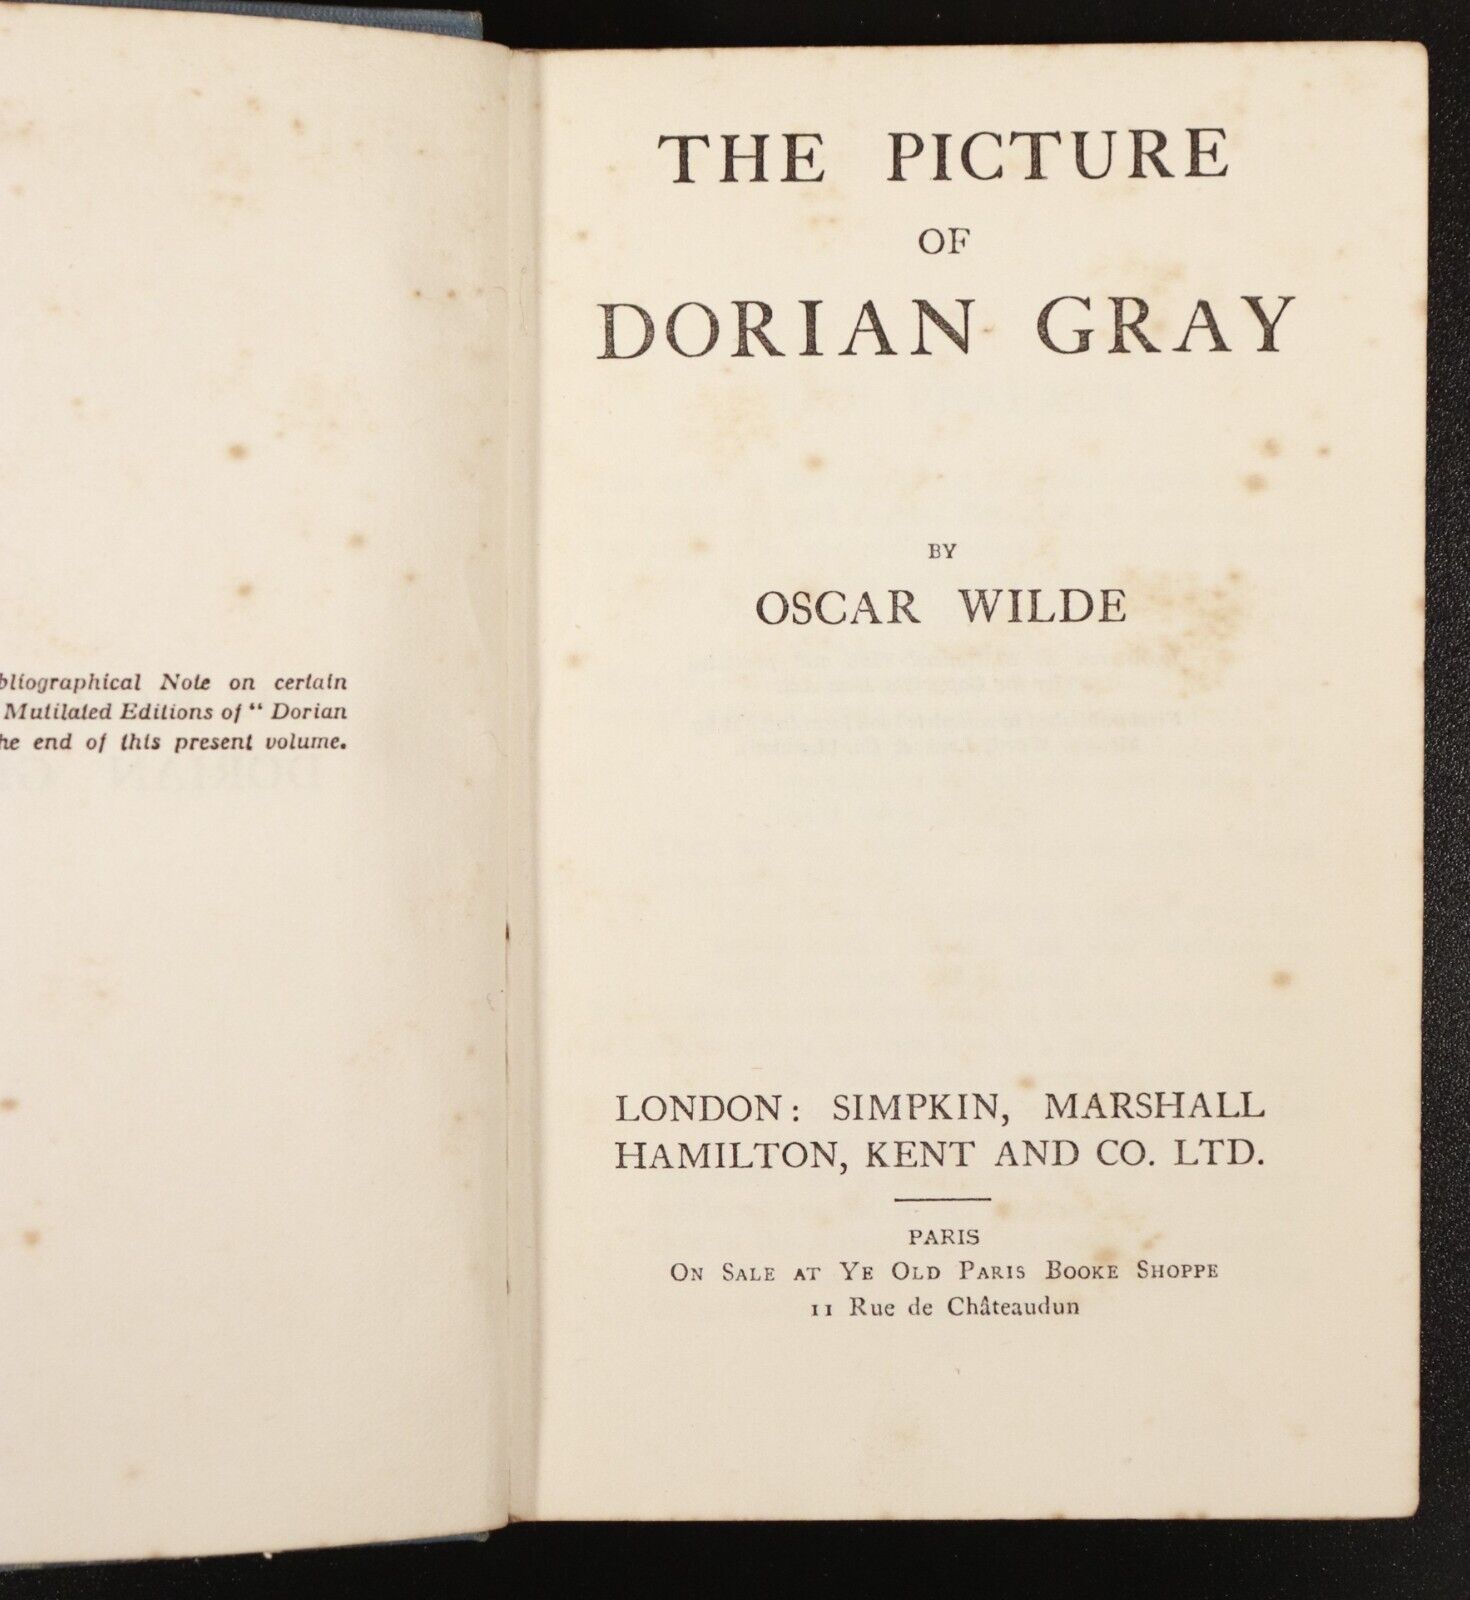 c1910 The Picture Of Dorian Gray by Oscar Wilde Antique Classic Literature Book